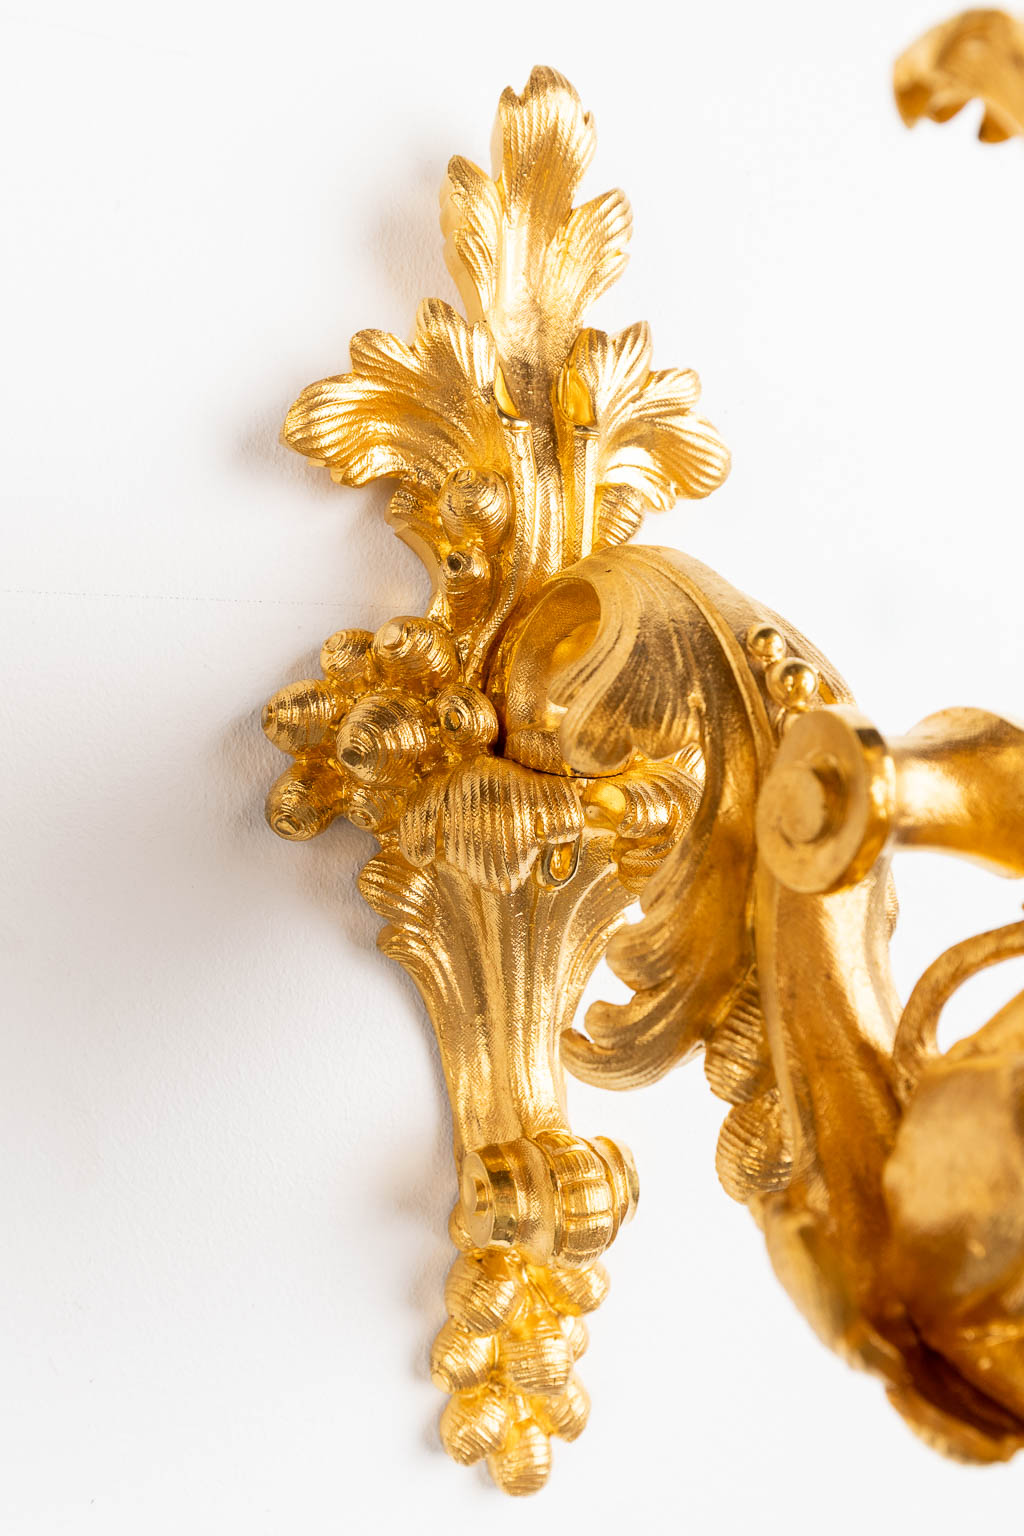 A pair of wall lamps or candle holders, lions with a heraldic image. Gilt bronze. Circa 1900. (D:35 x W:20 x H:35 cm)